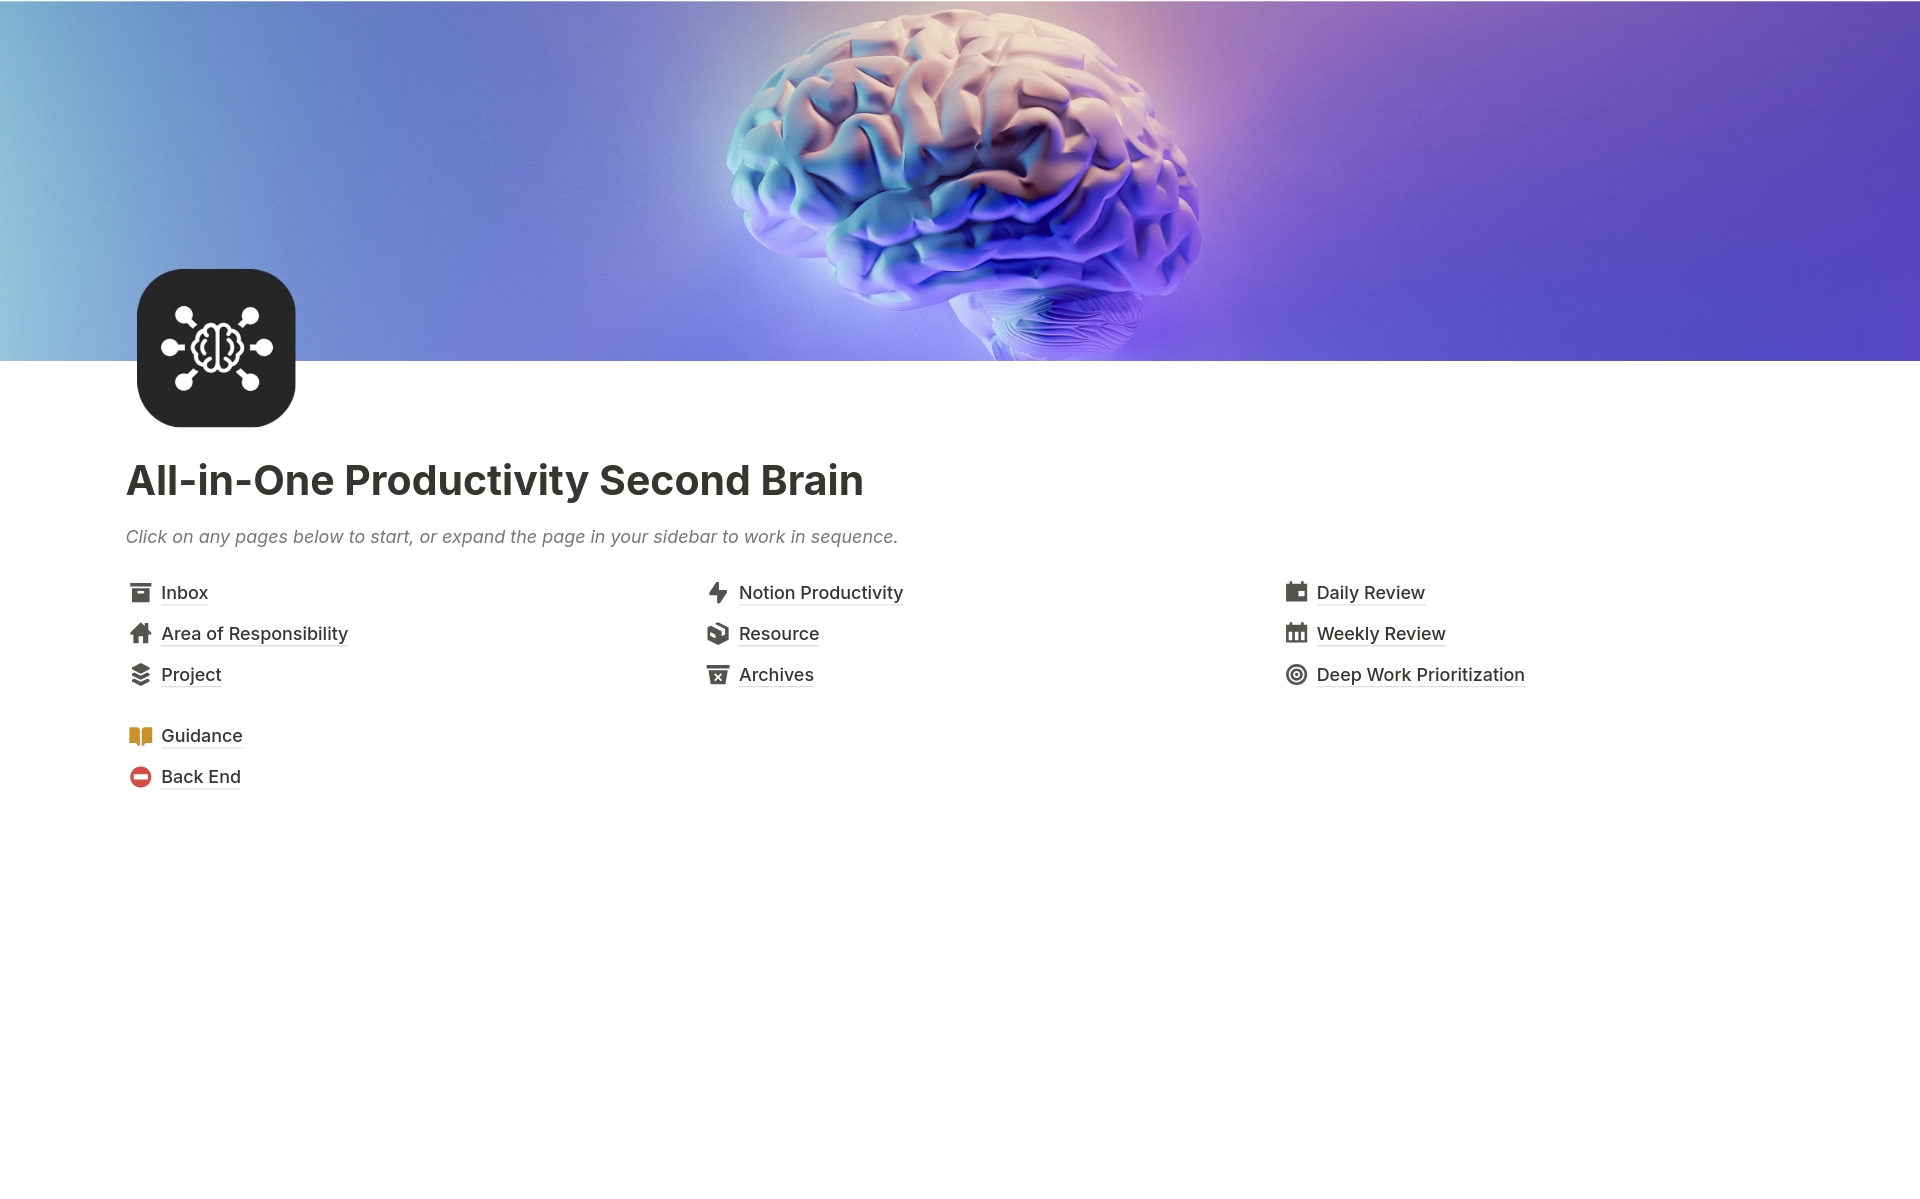 Organize Your Already-Productive Life with Notion Second Brain focused for productivity